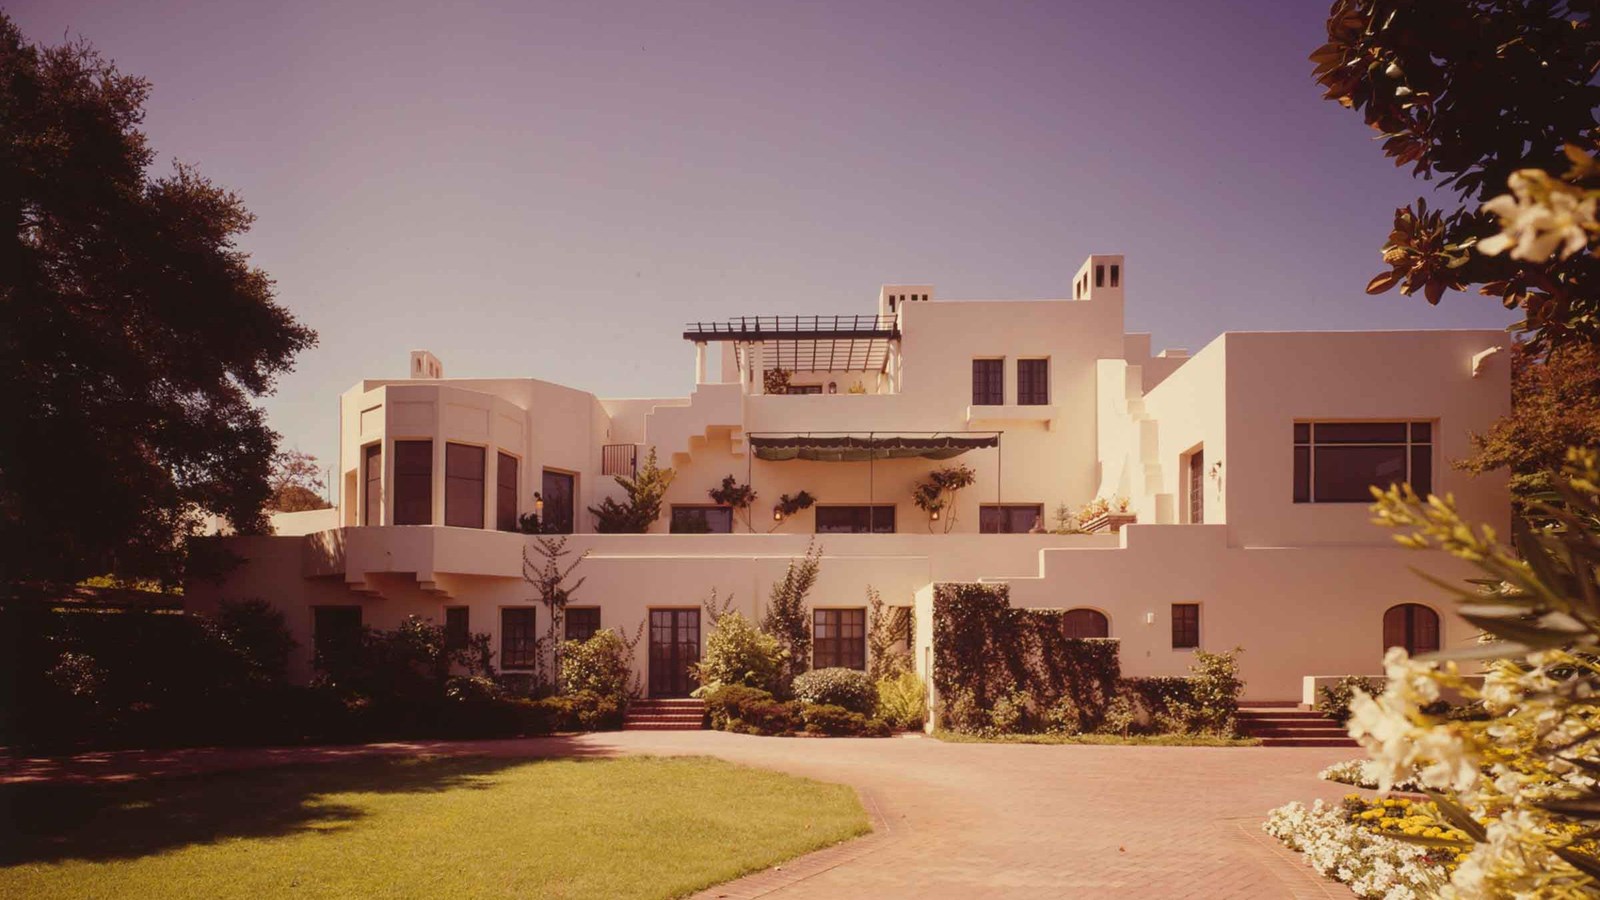 A huge international style house resembles beige blocks piled up.